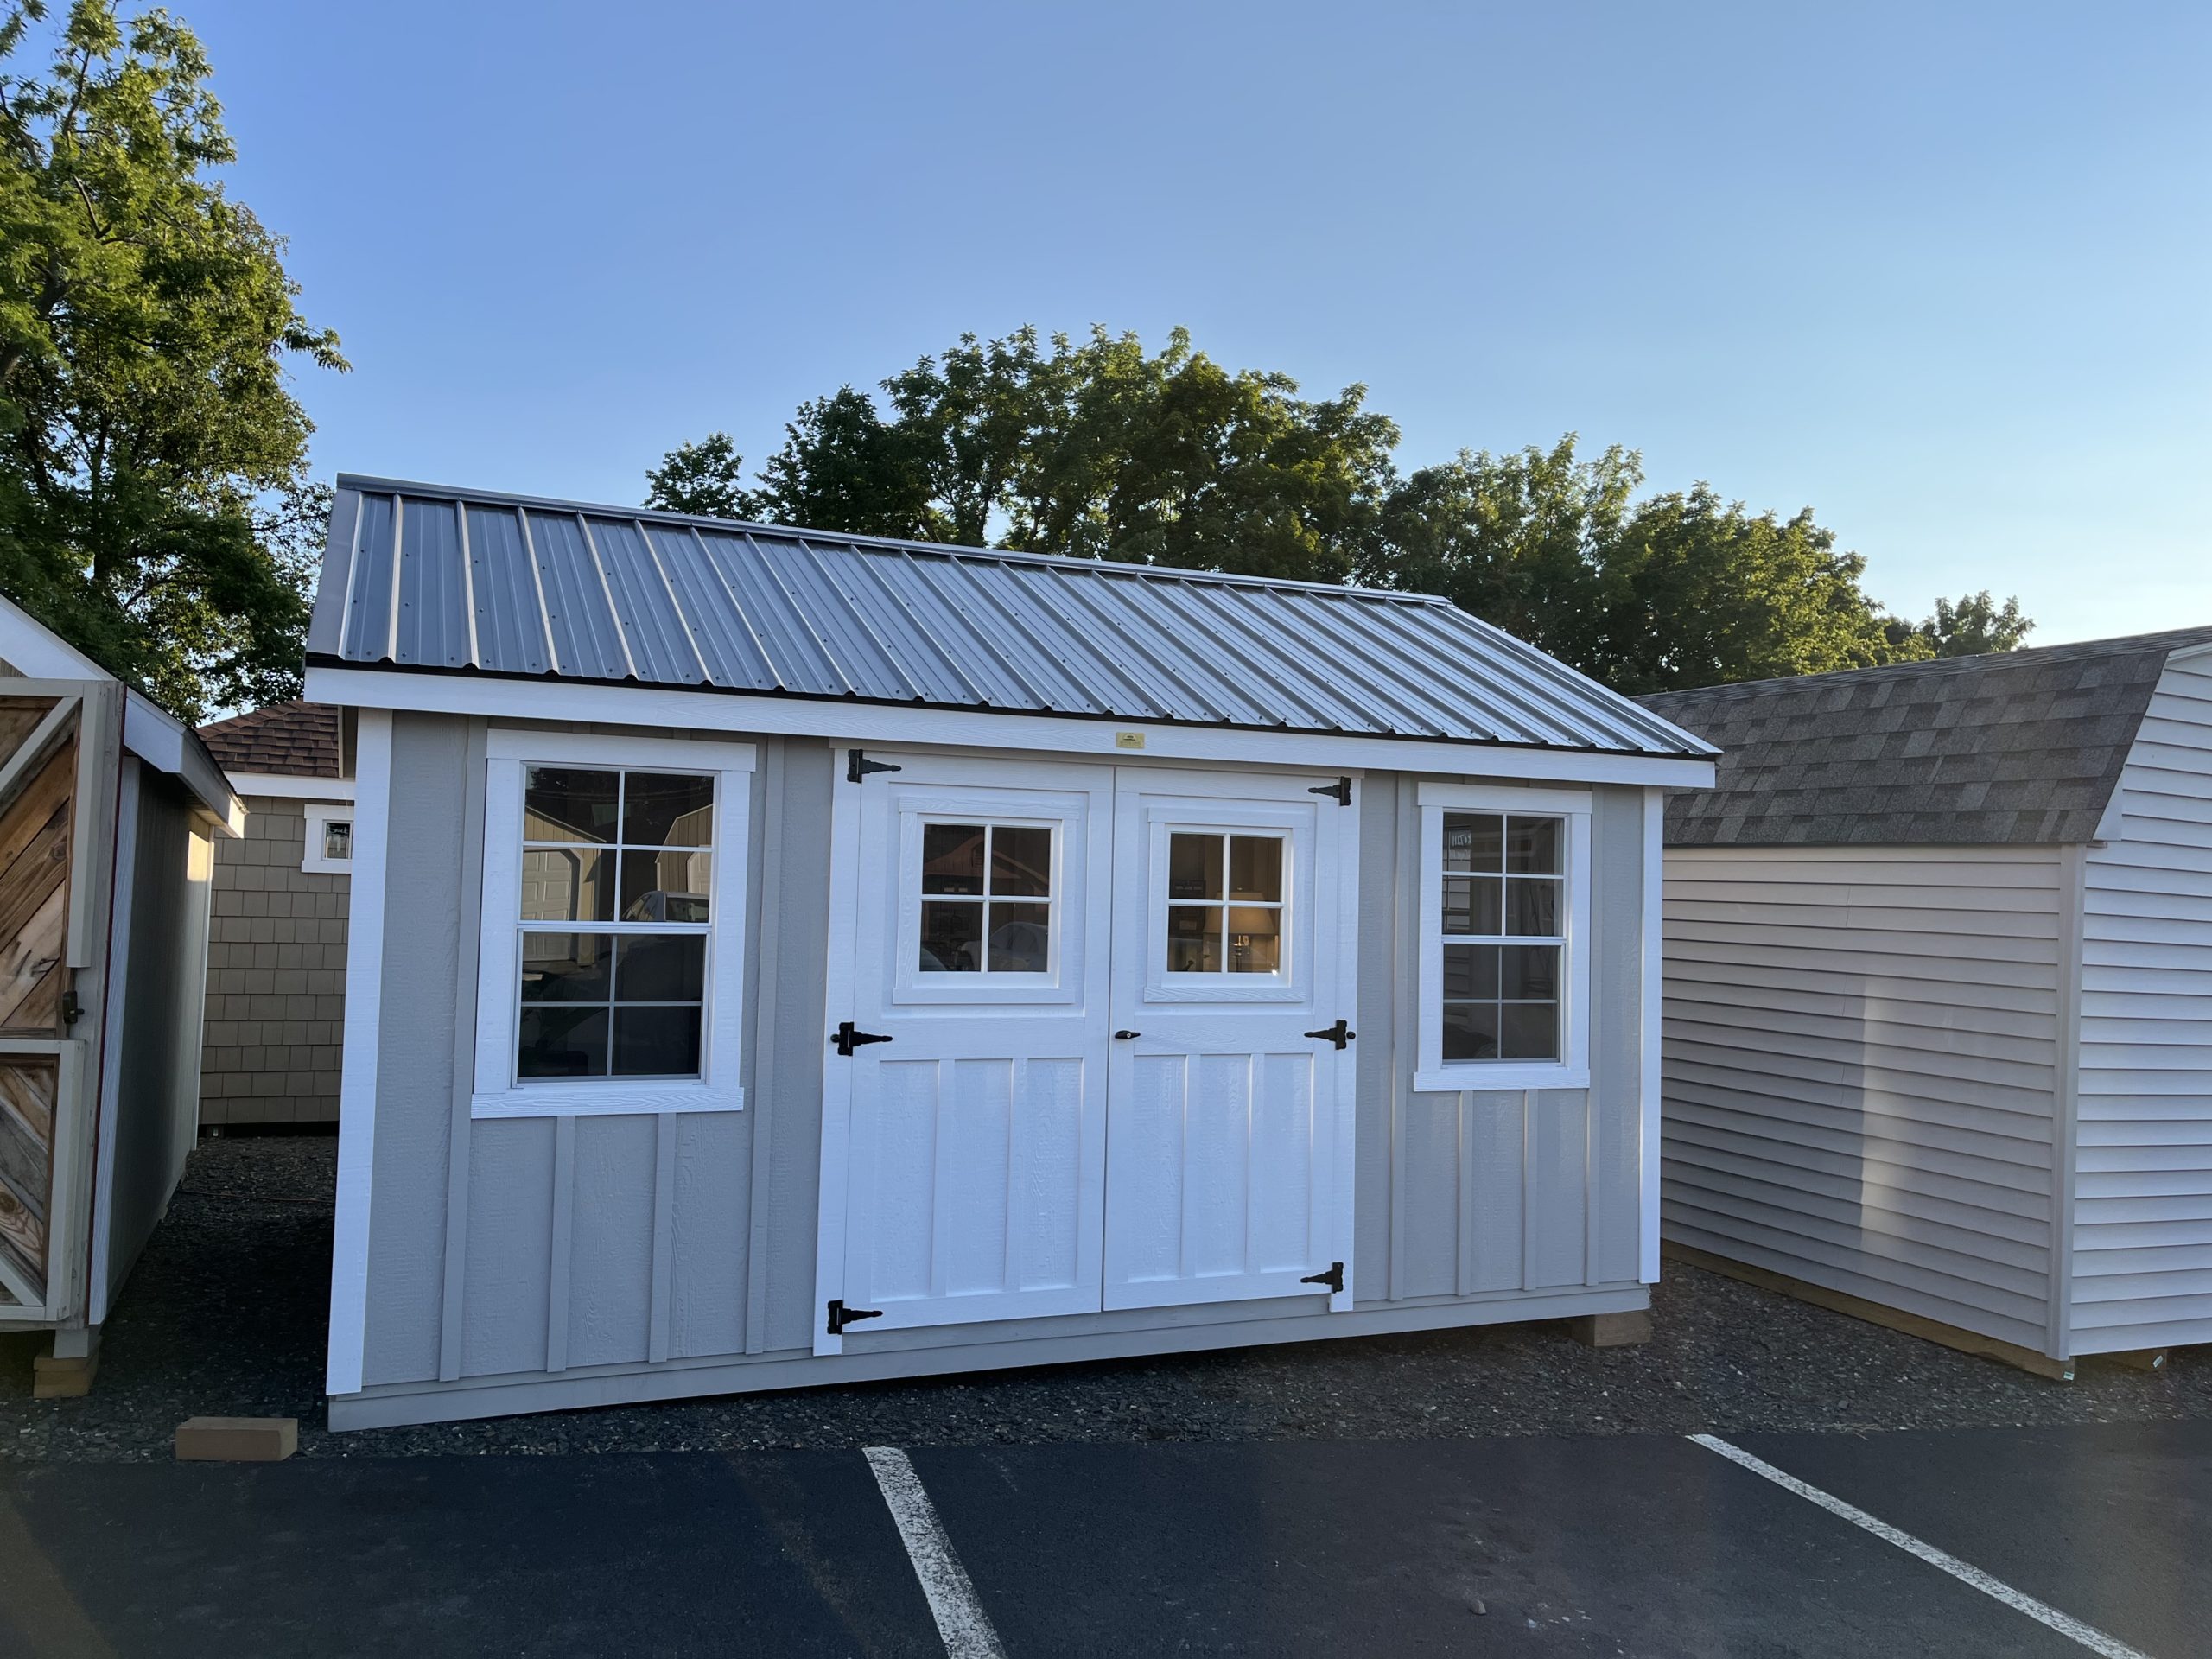 12' x 16' T-1-11 Furnished shed #7211